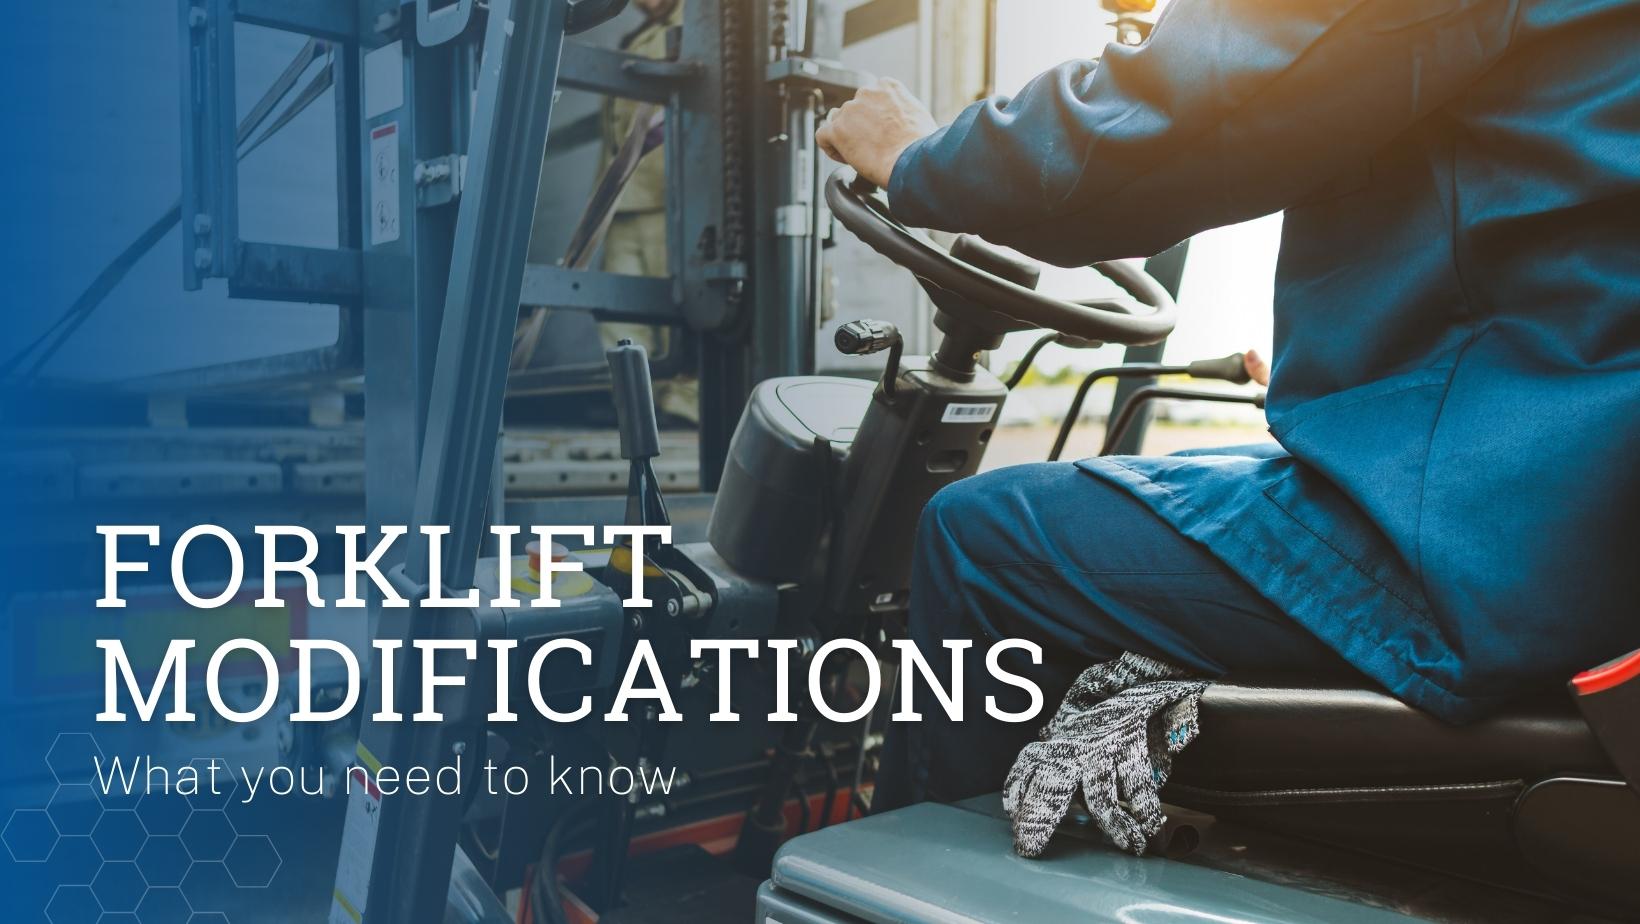 Forklift Modifications- What you need to know